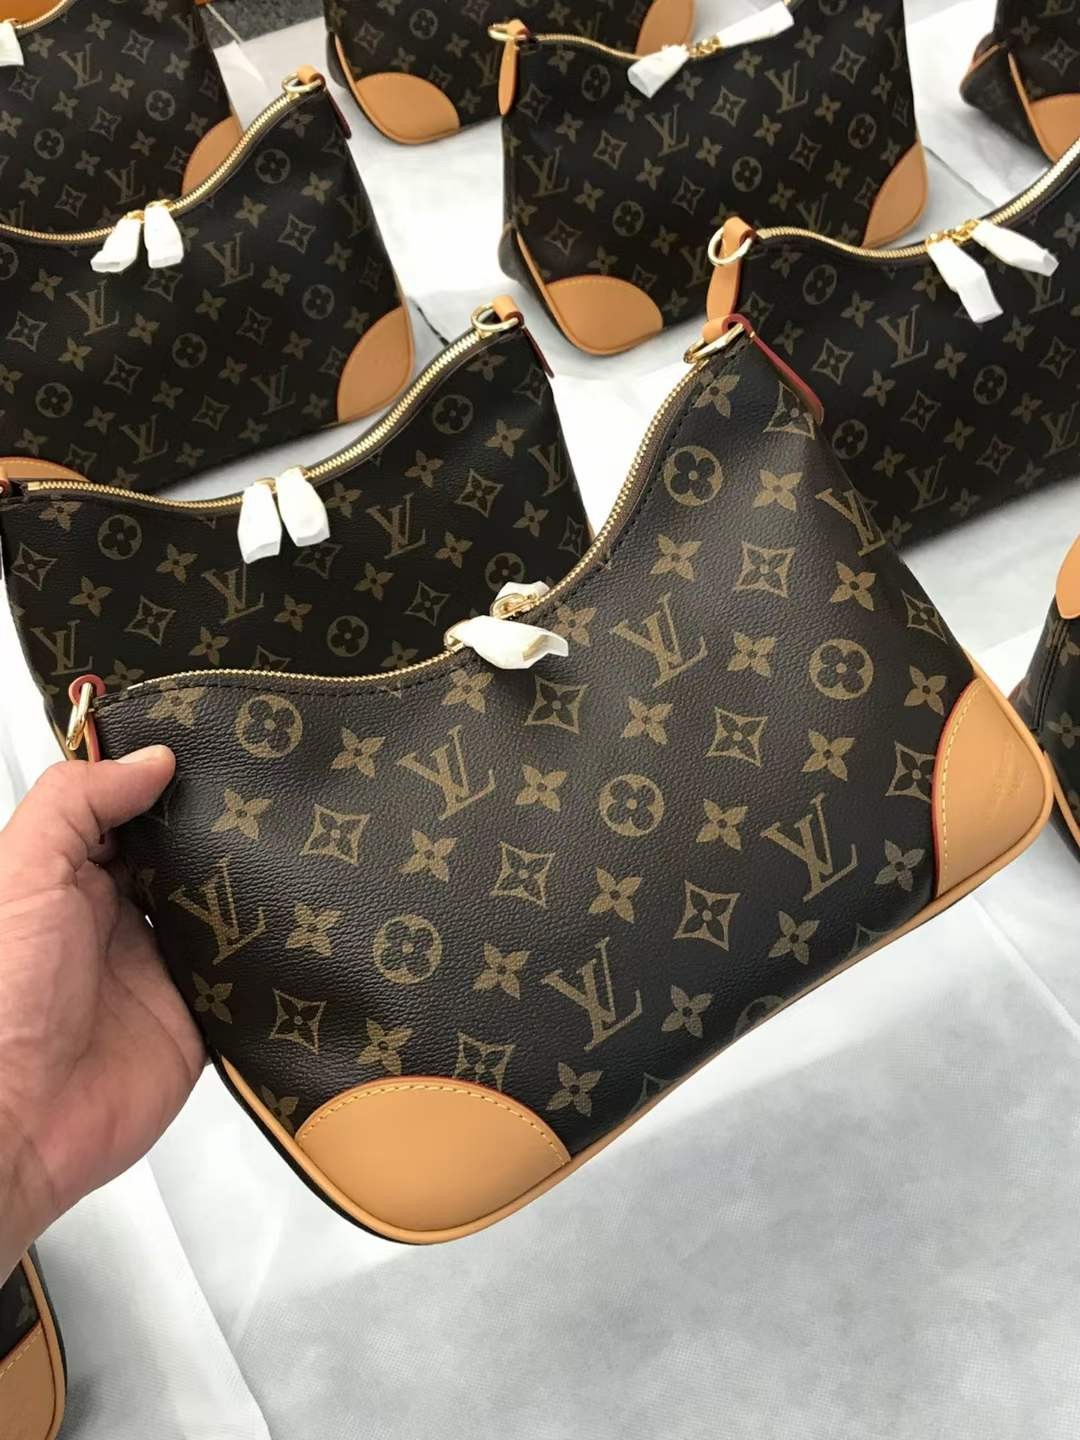 Louis Vuitton M45832 croissant with yellow leather Boulogne top replica handbags Lot Inspection (2022 Special)-Best Quality Fake designer Bag Review, Replica designer bag ru